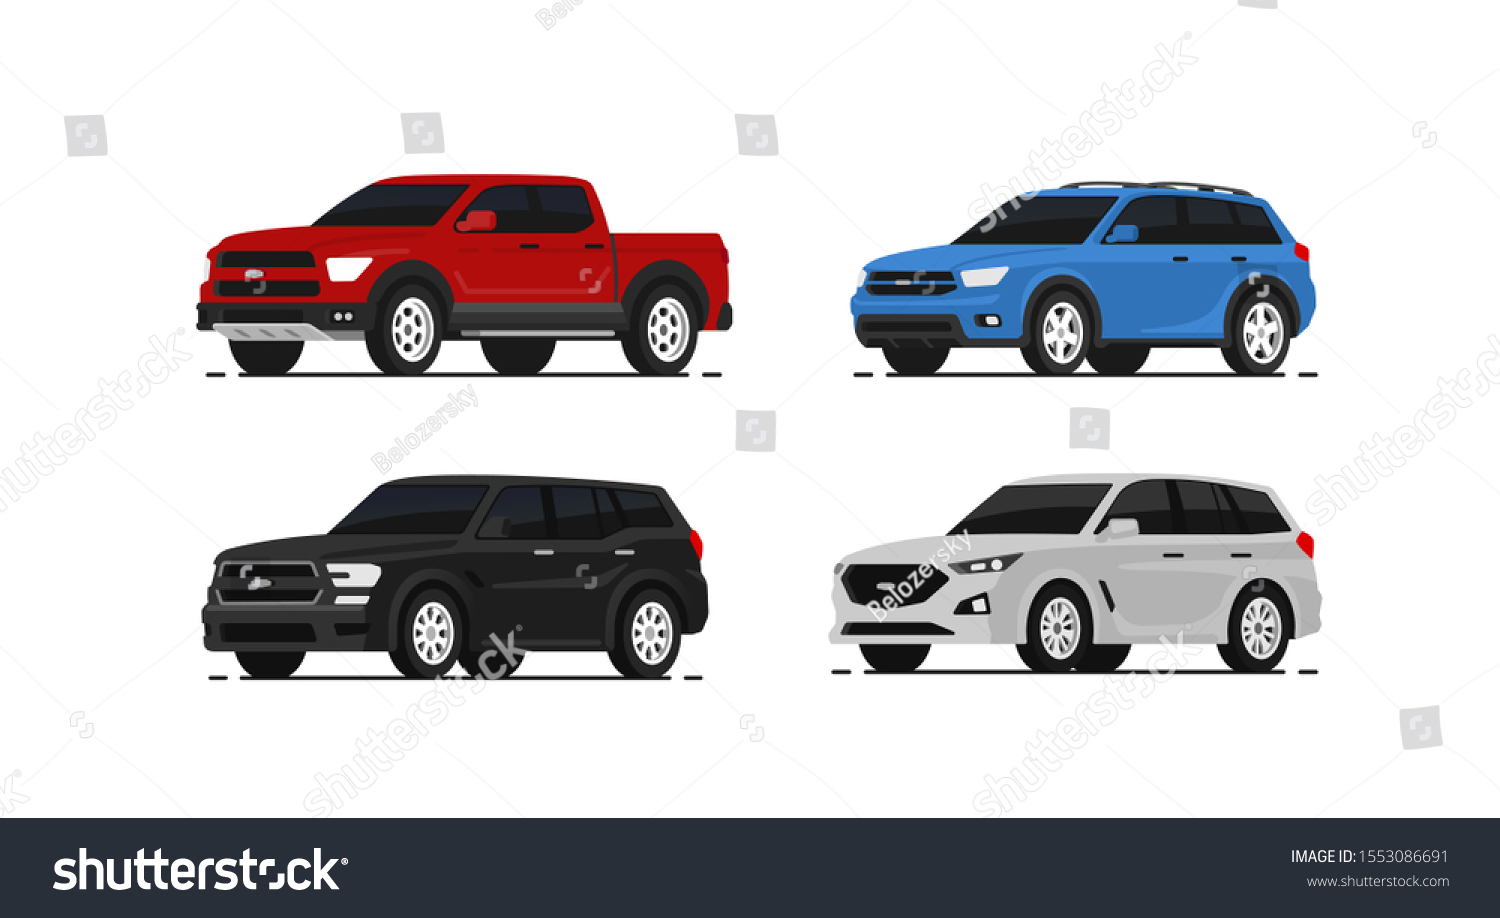 Car suv collection. Auto side view. Red, blue, black and white automobile. Vector illustrayion in flat style. #1553086691